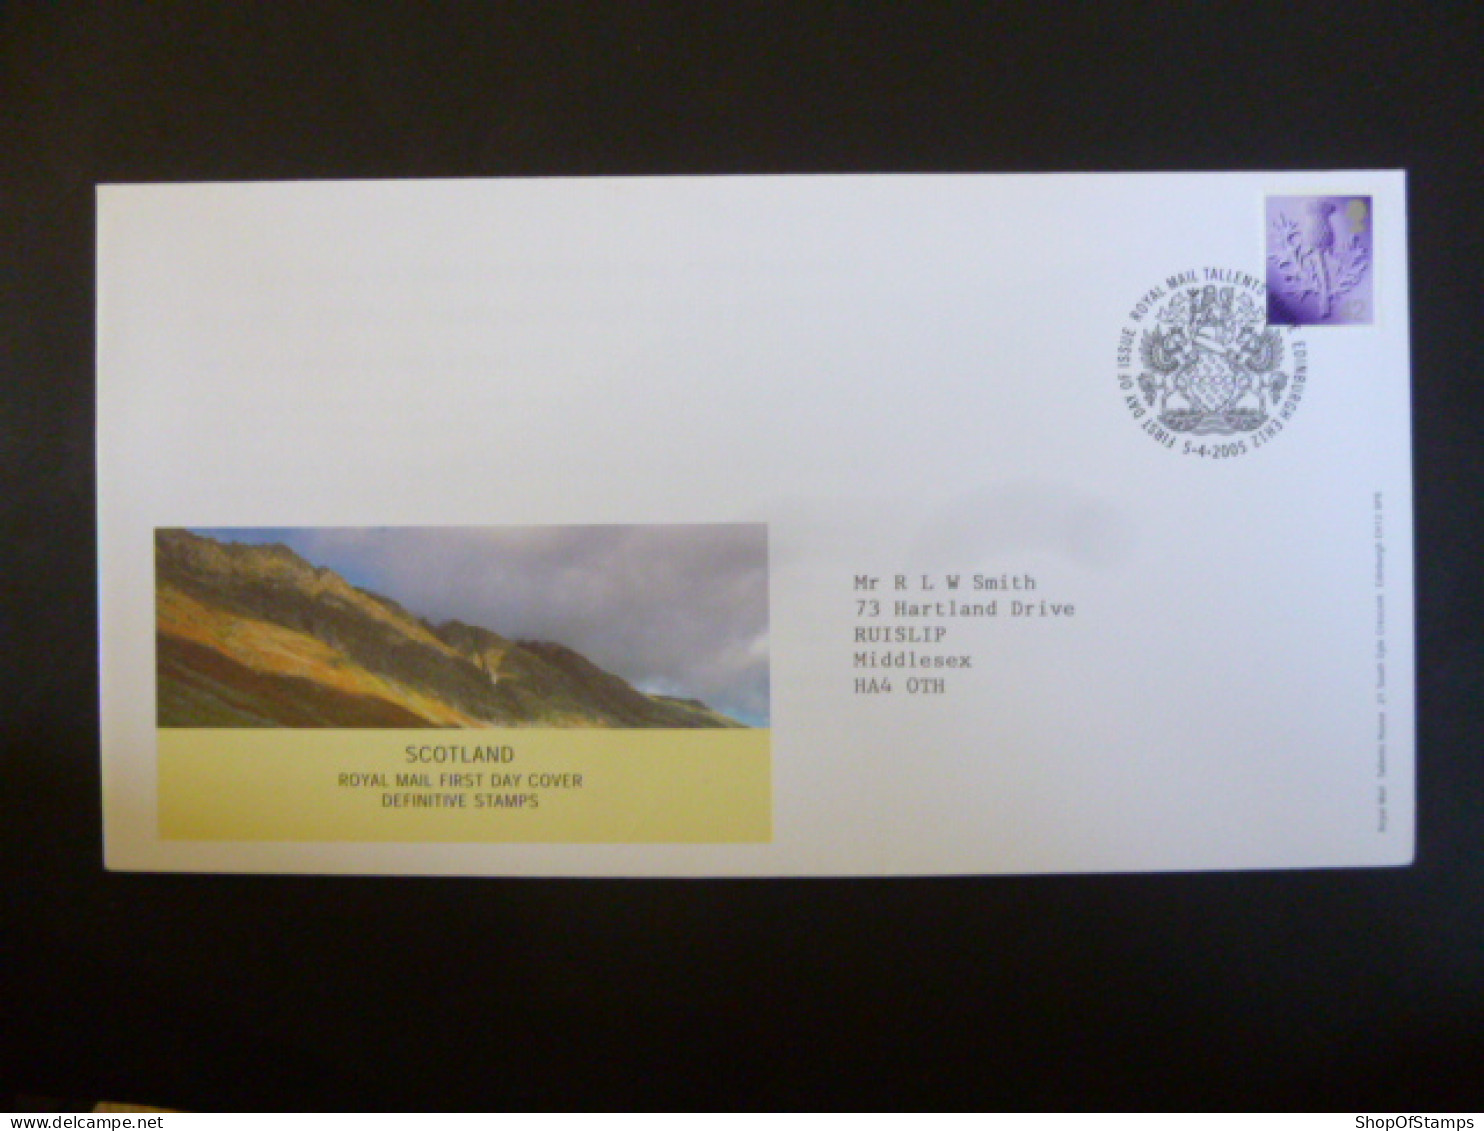 GREAT BRITAIN SG S113 FDC ROYAL MAIL TALENT HOUSE EDINBURGH - Unclassified